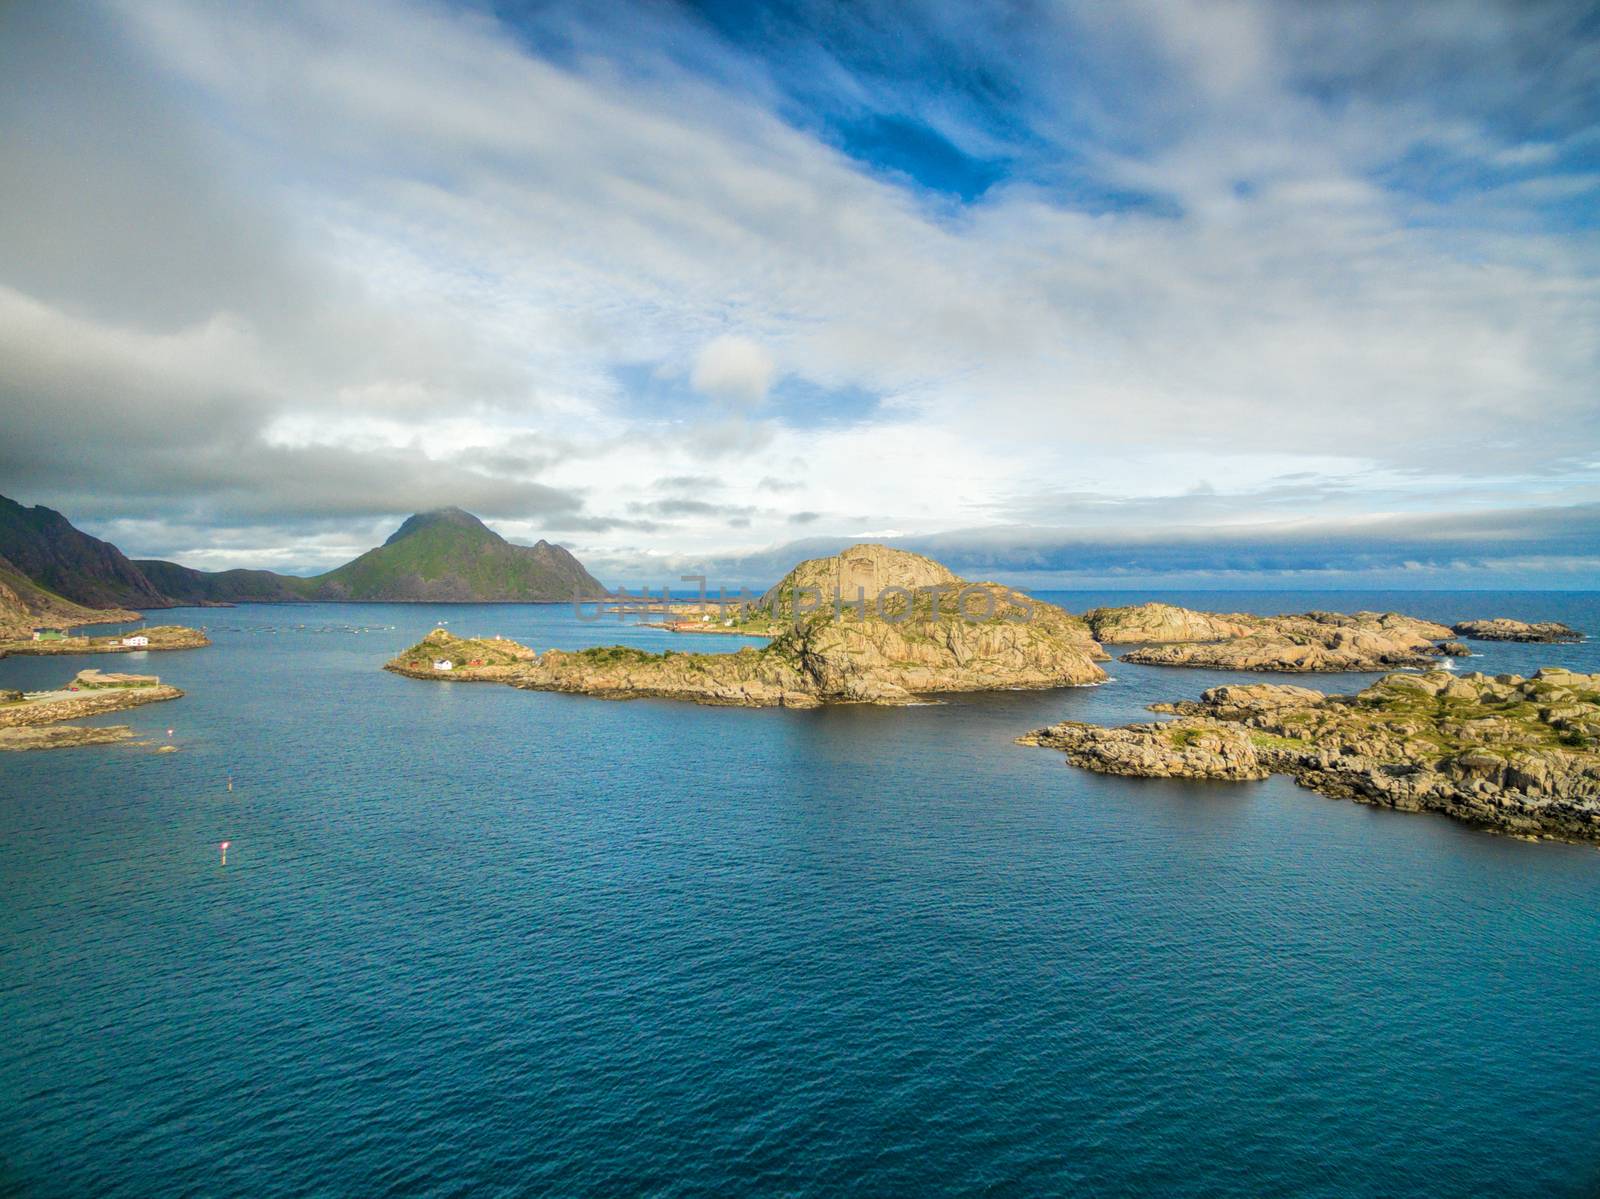 Picturesque islets on the coast of Lofoten islands in Norway